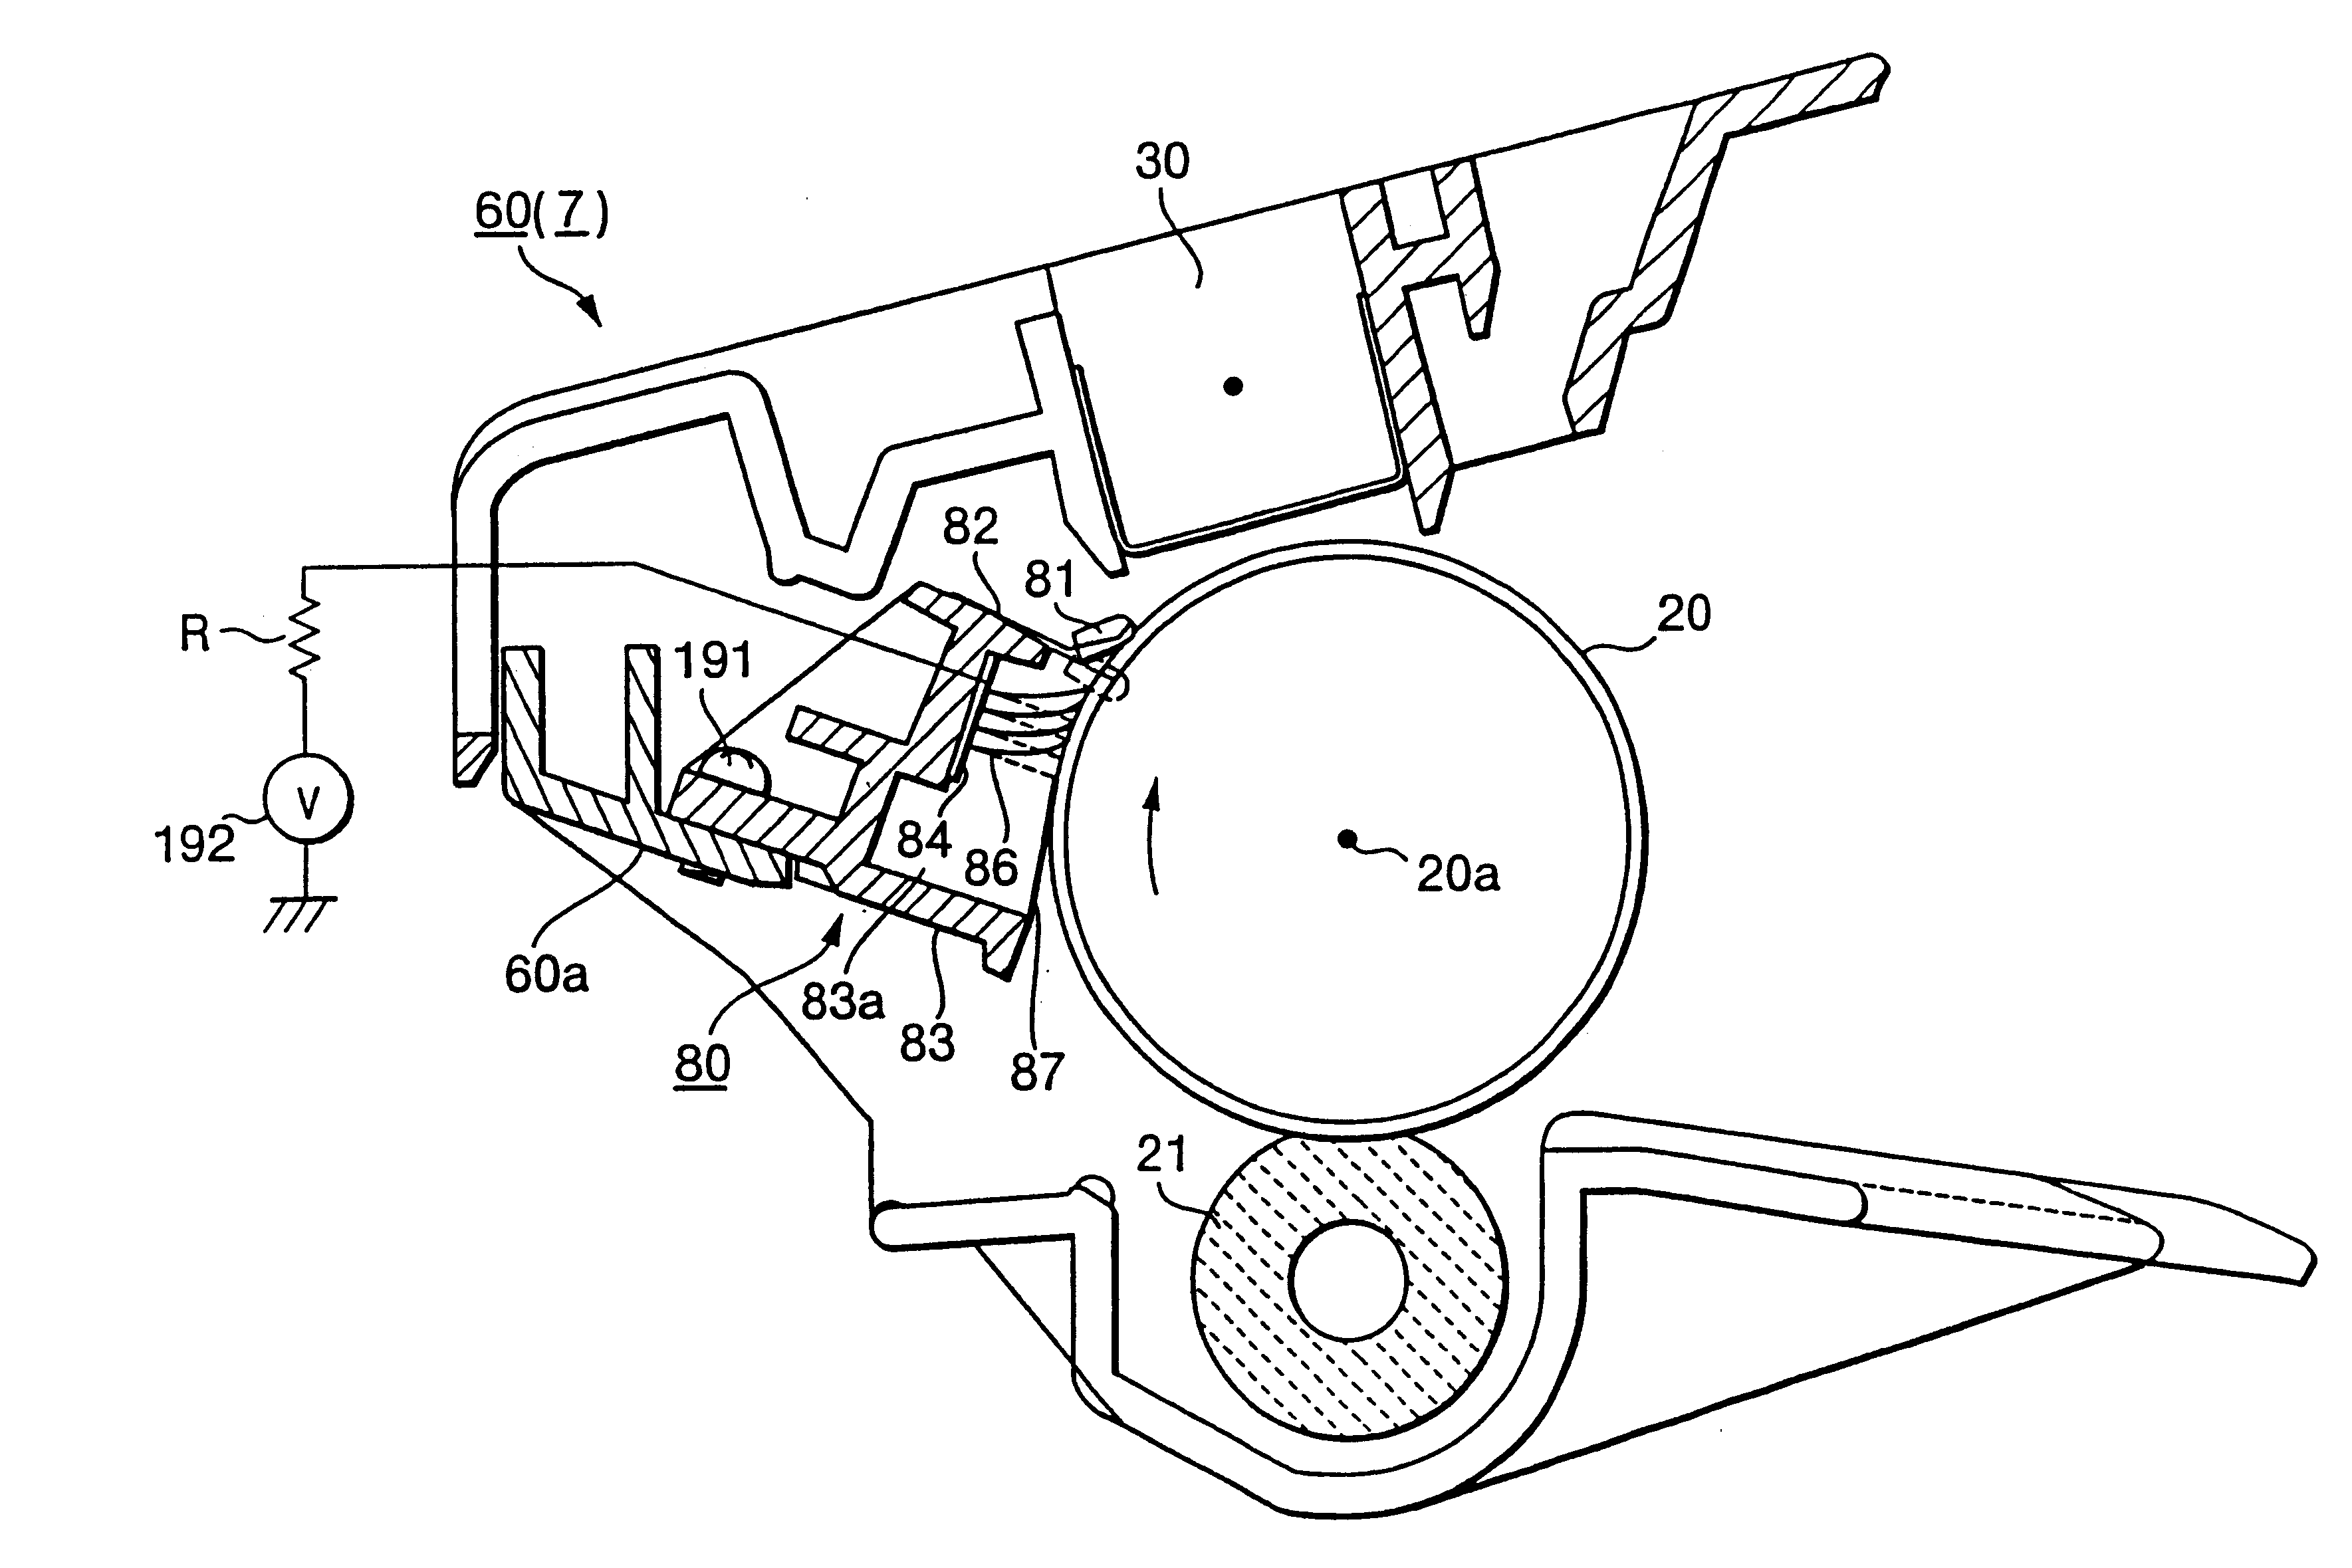 Image forming apparatus having an electrically charged paper dust removing brush